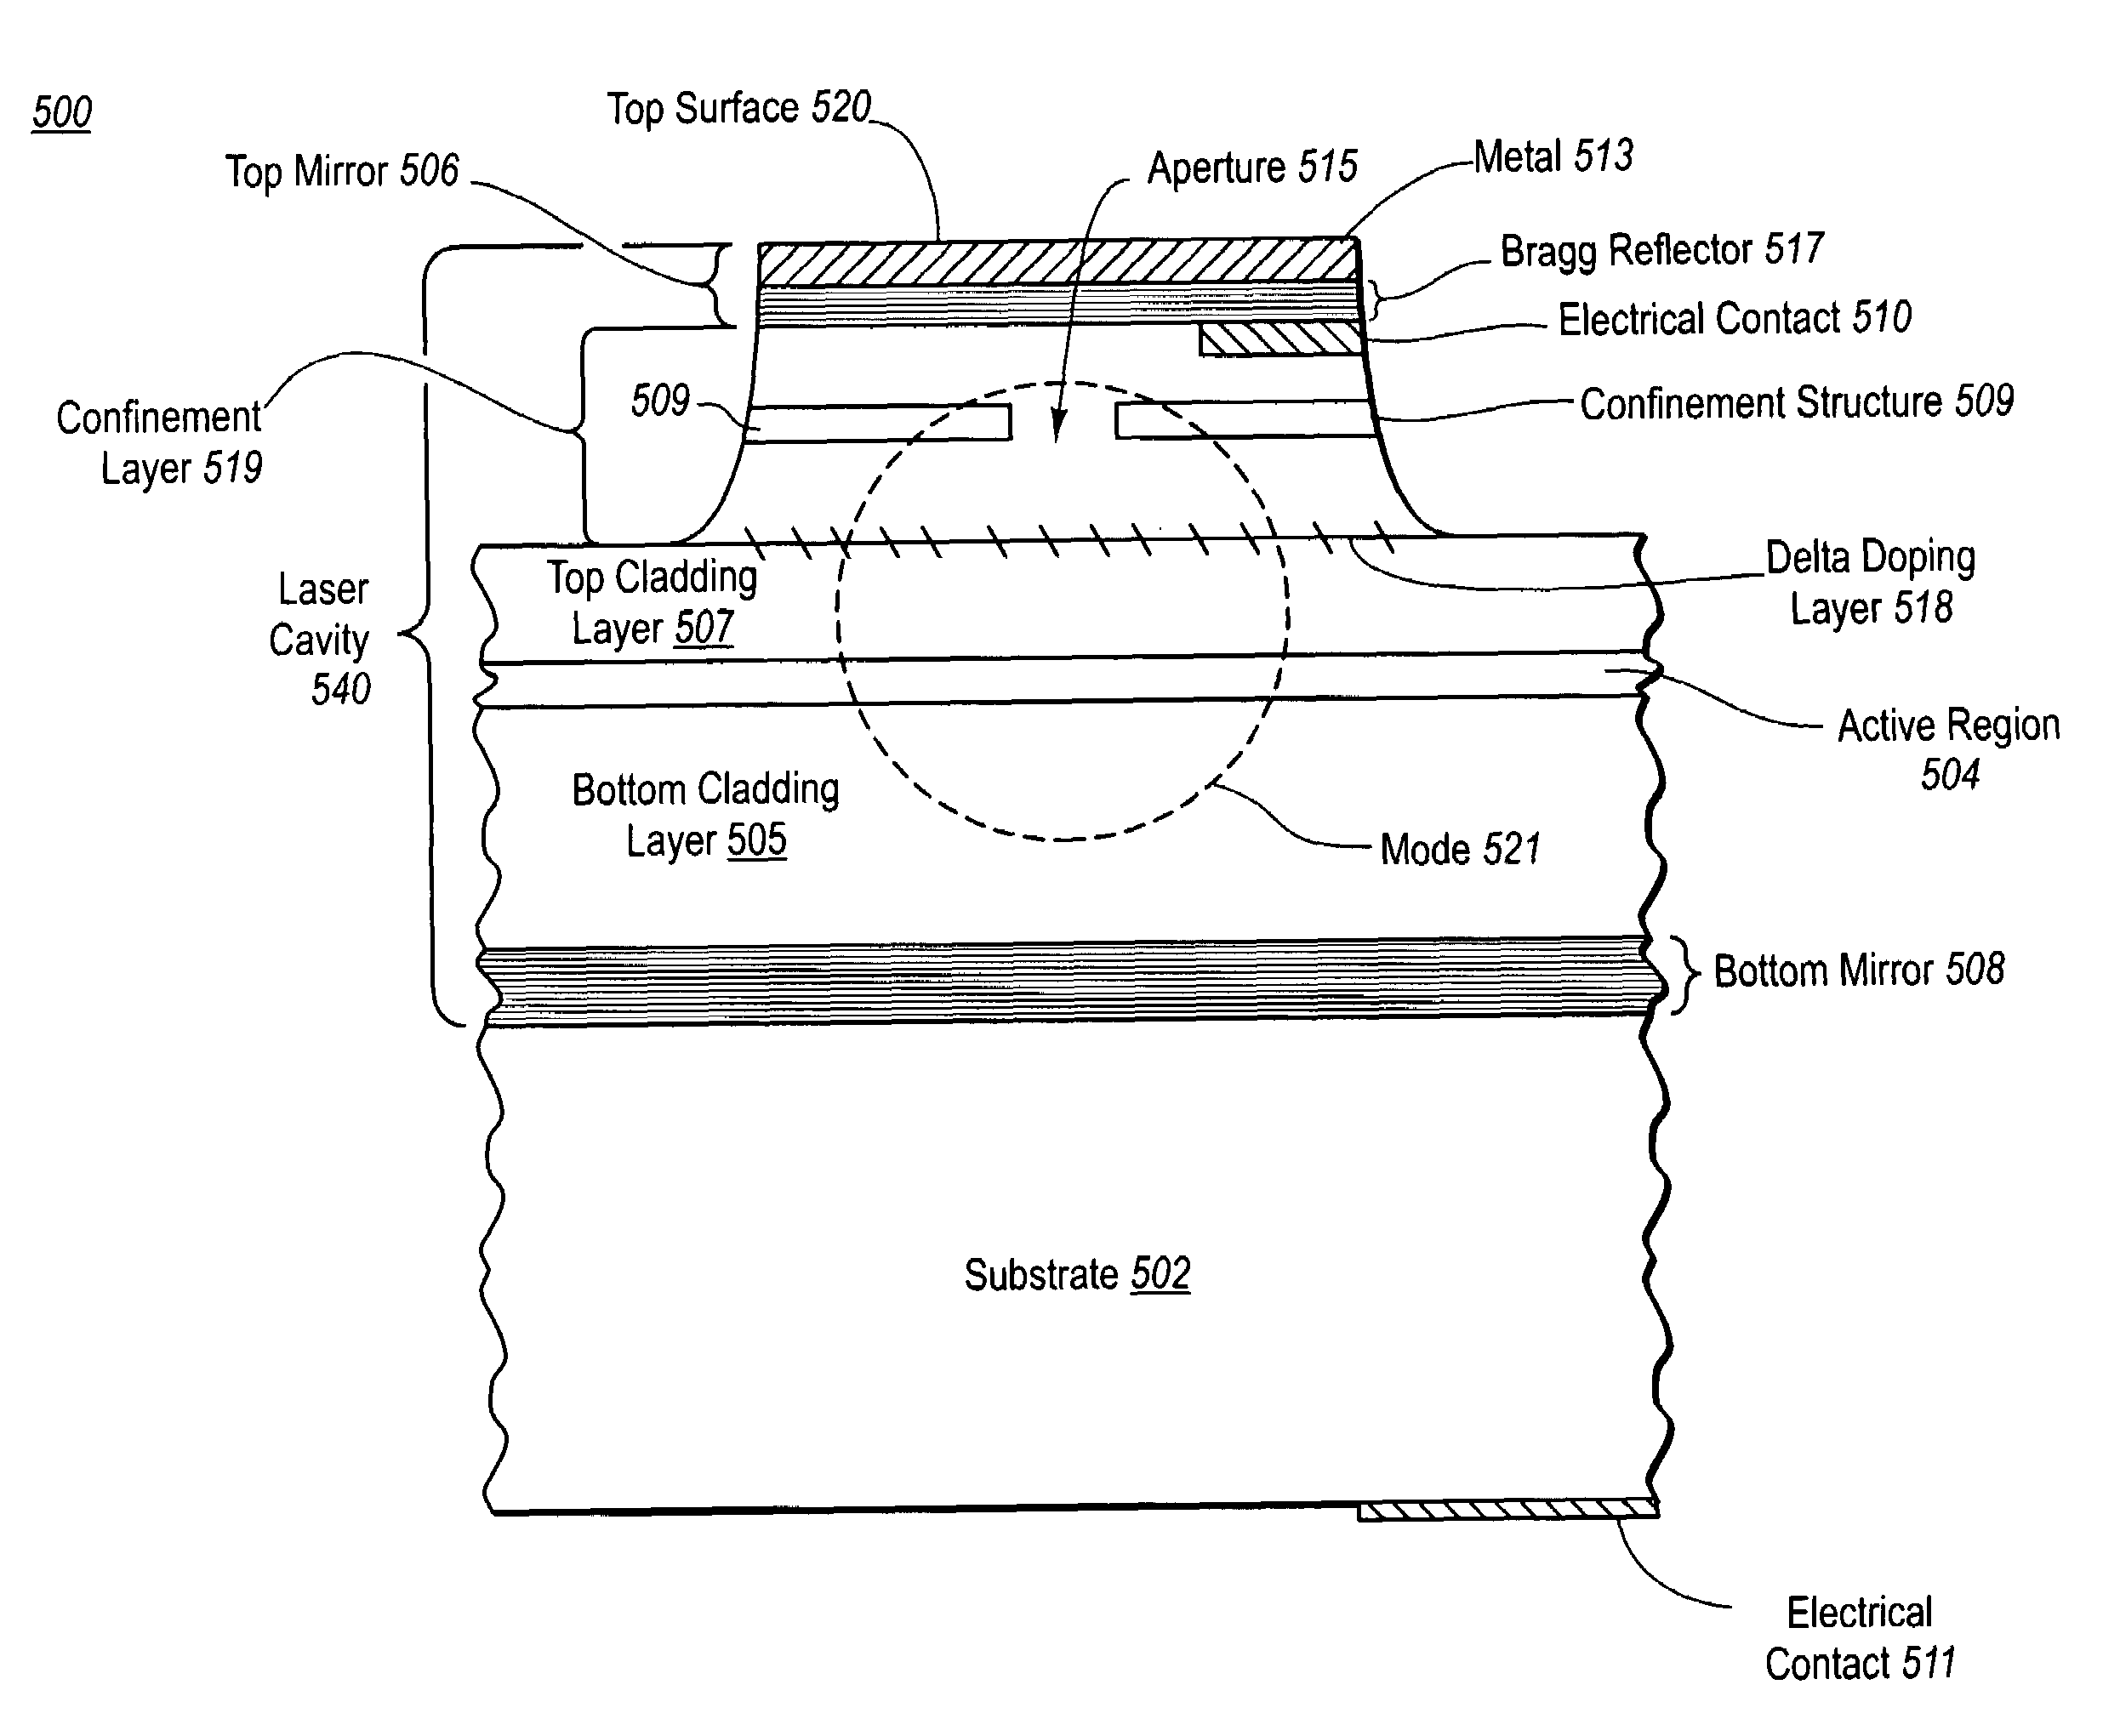 Optical transmitter including a linear semiconductor optical amplifier